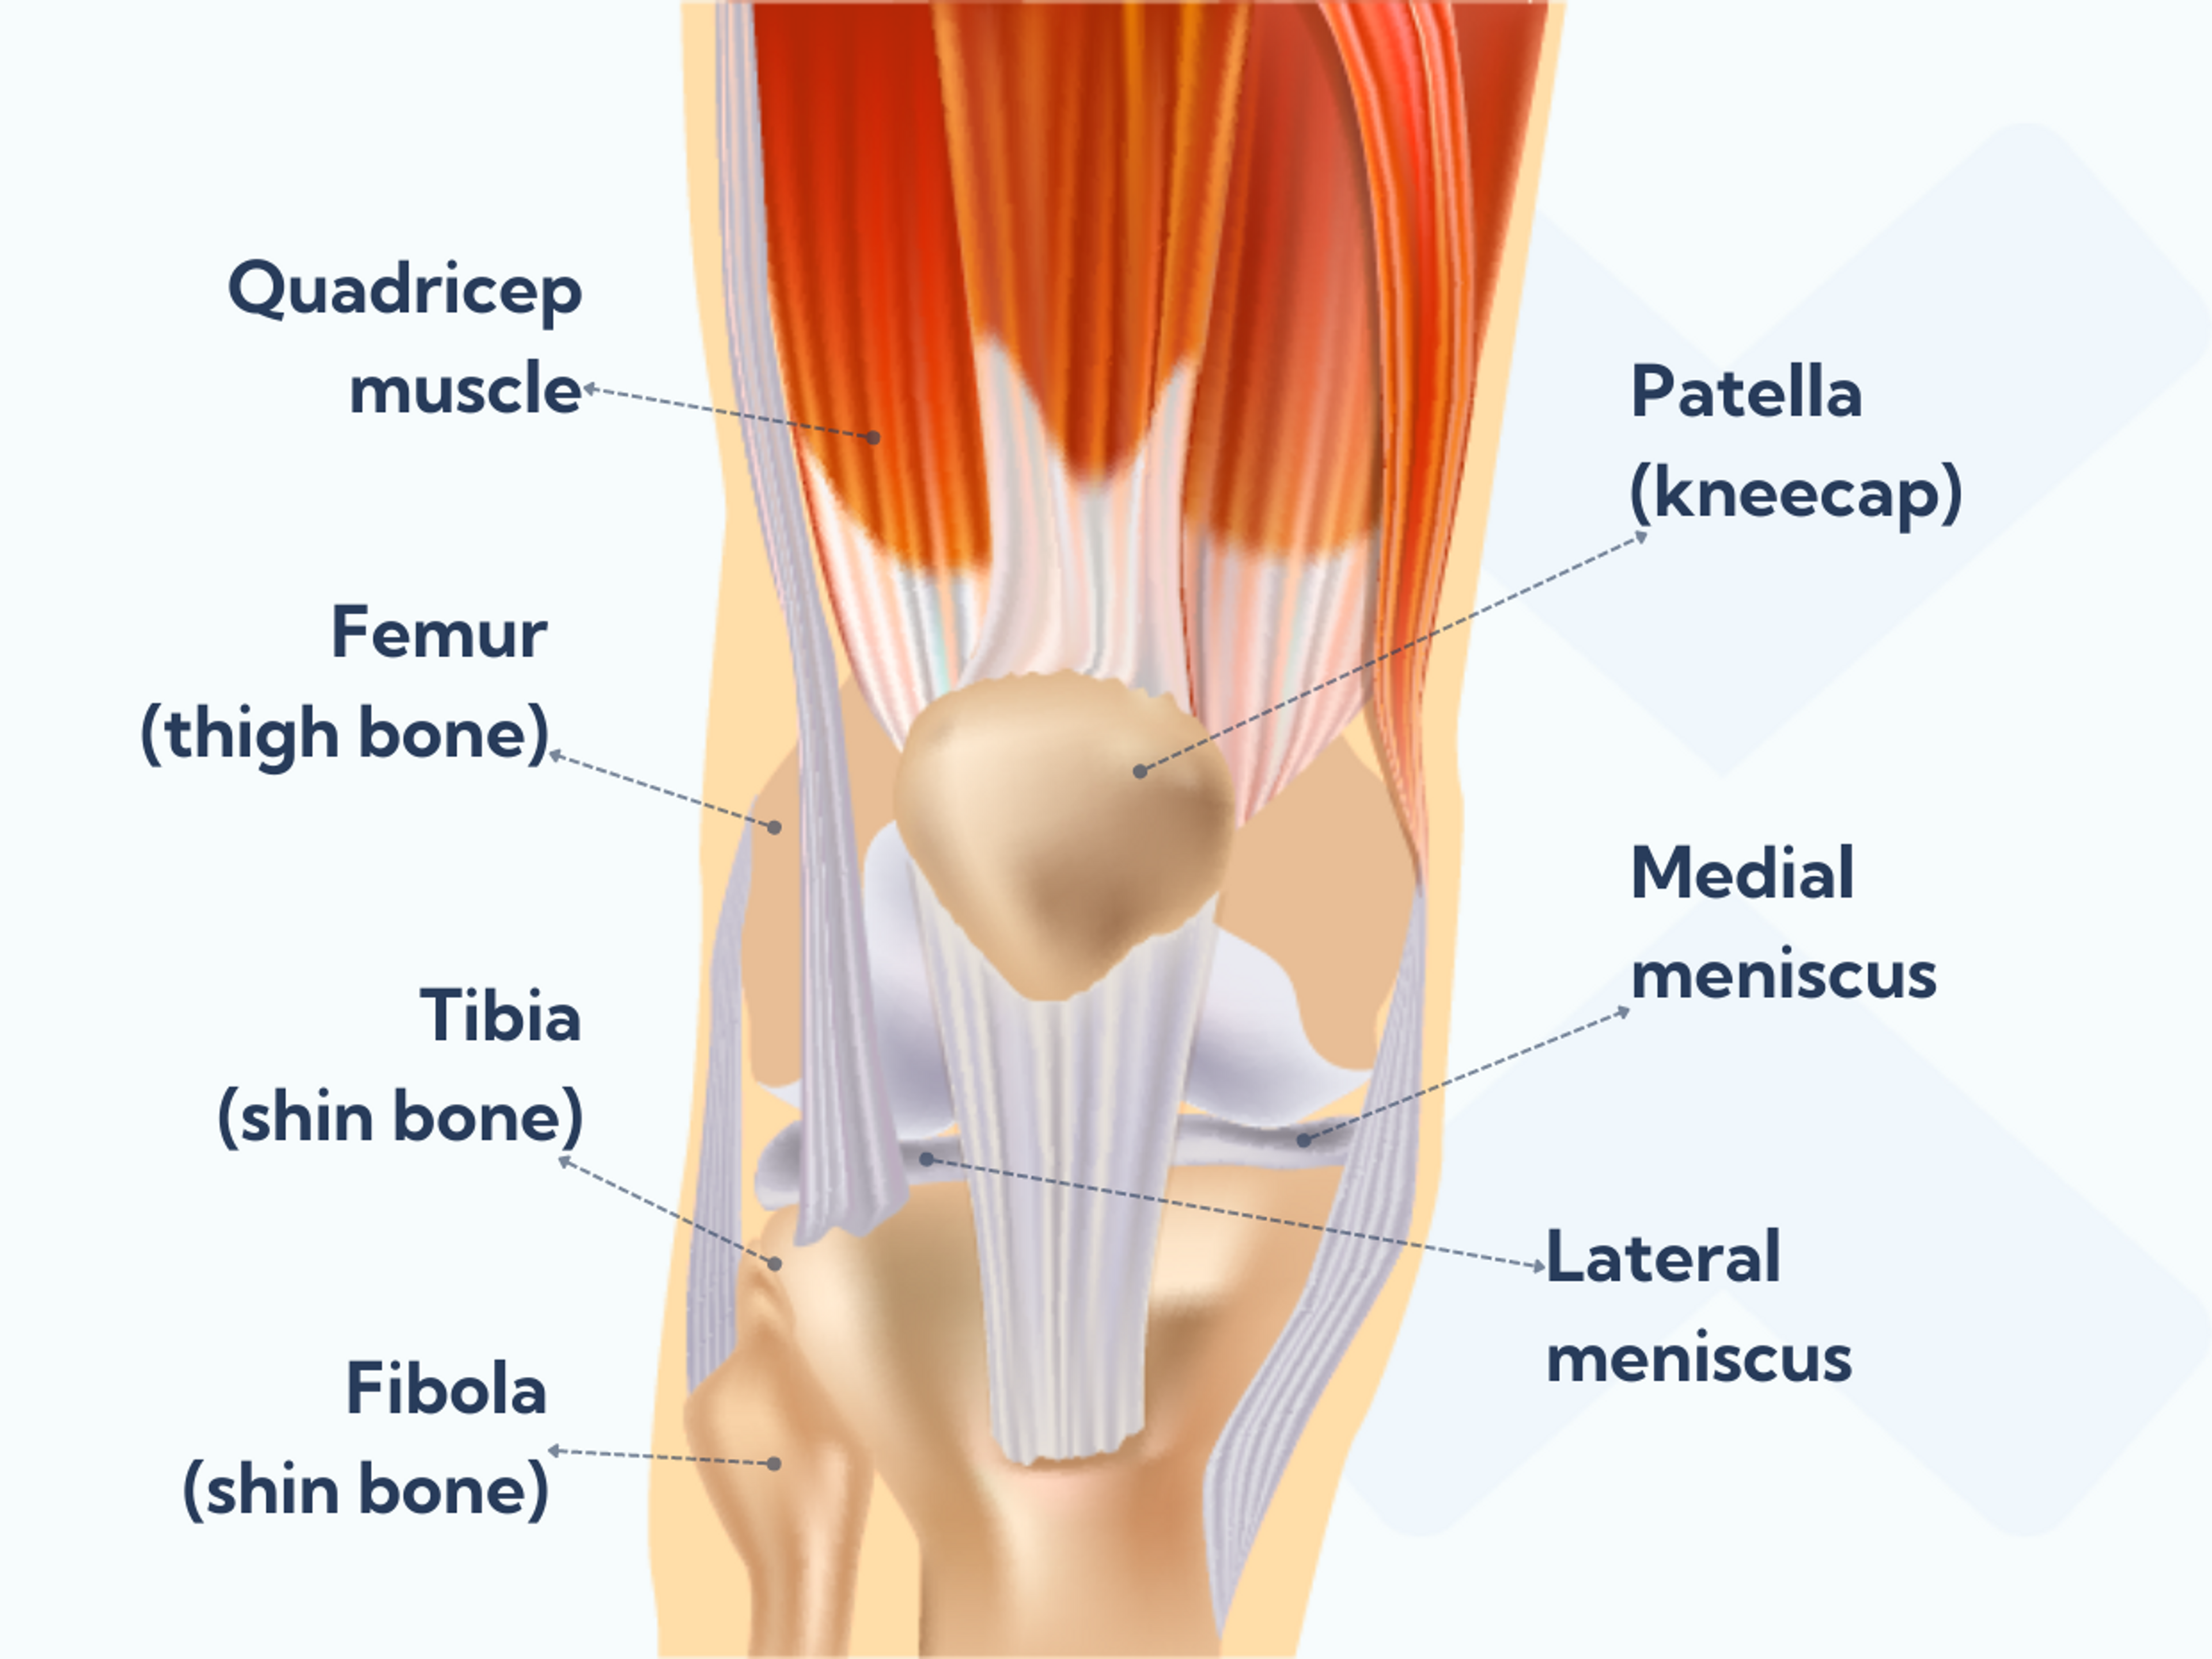 You will only have swelling in your knee after you sprain it if you injure a structure that's located inside the knee joint.